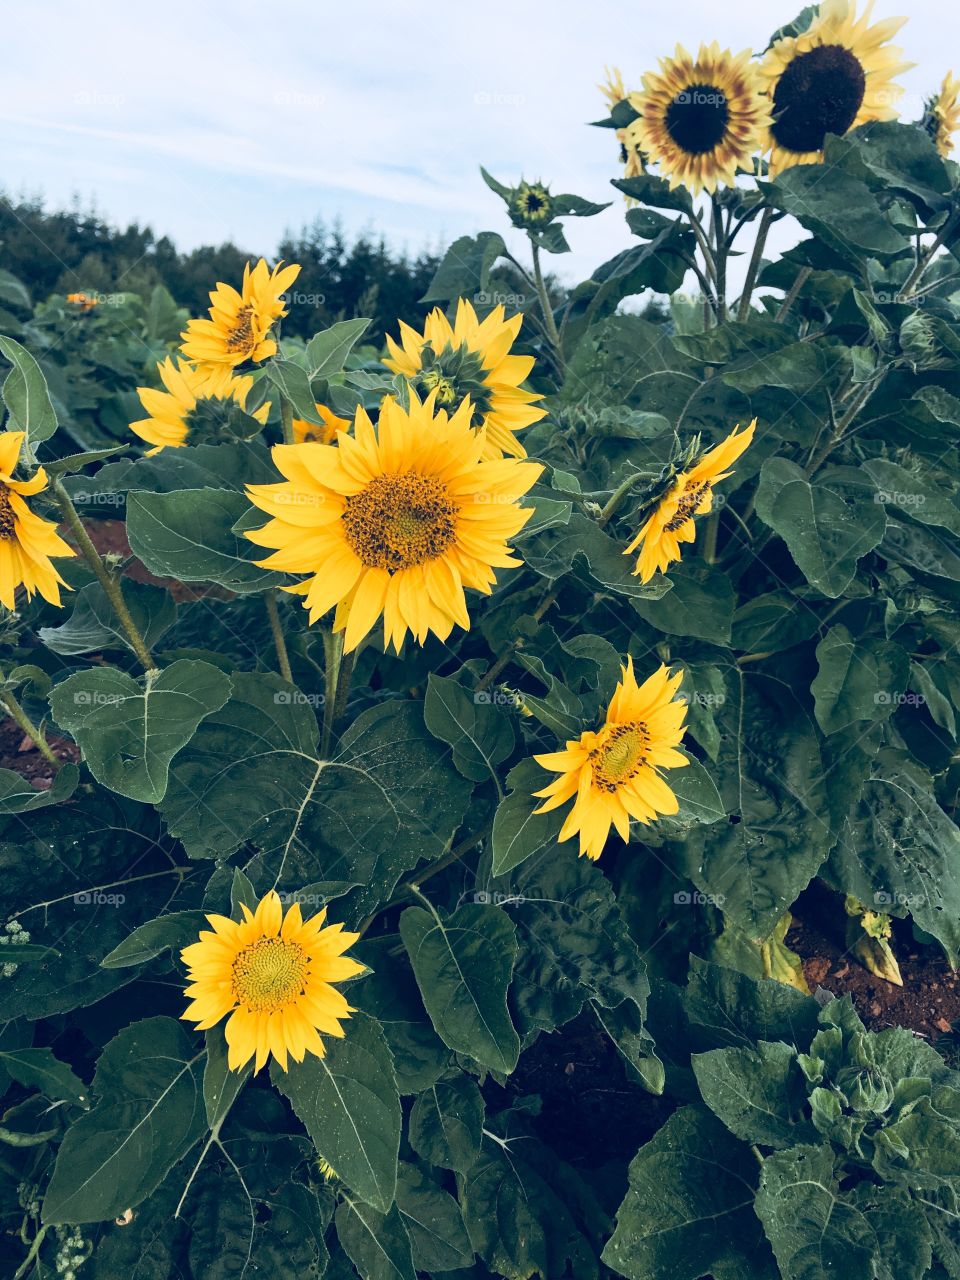 Yellow Sunflowers growing in a country garden surrounded by green leaves. 